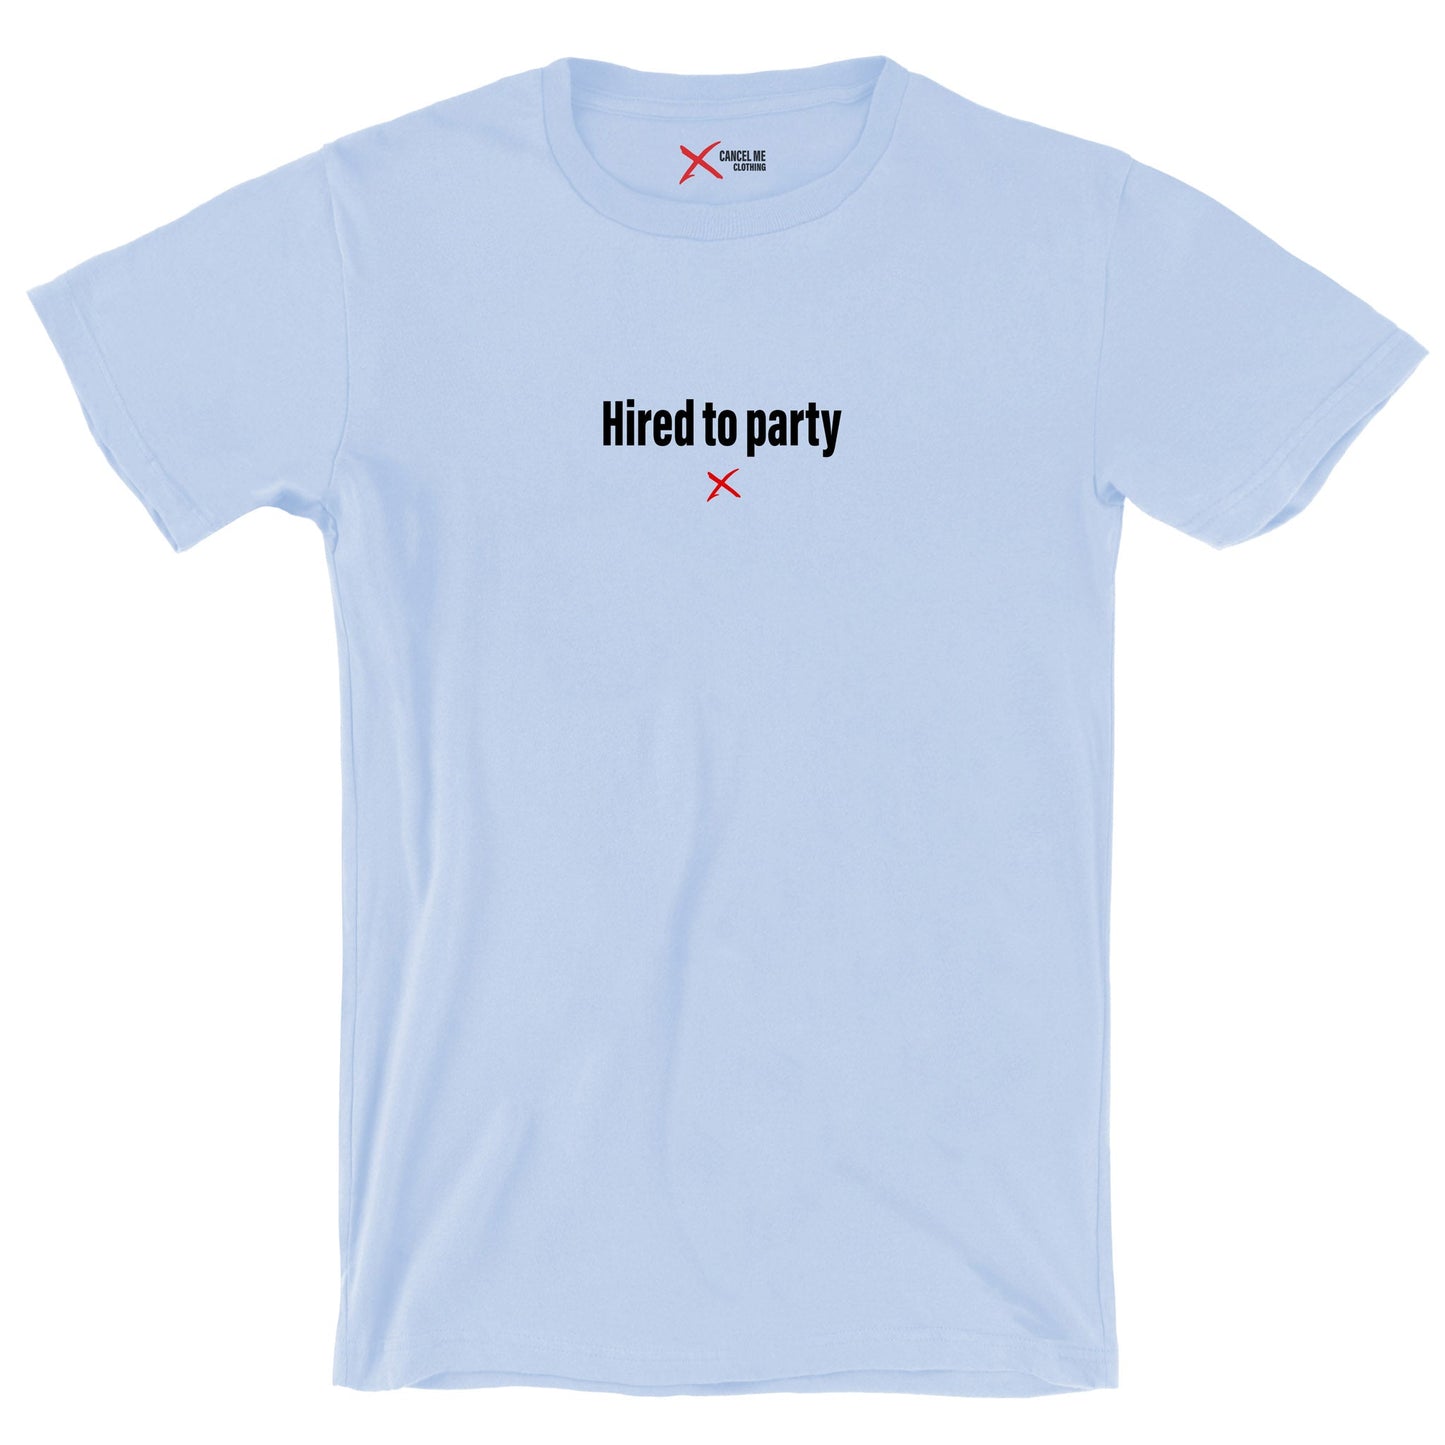 Hired to party - Shirt